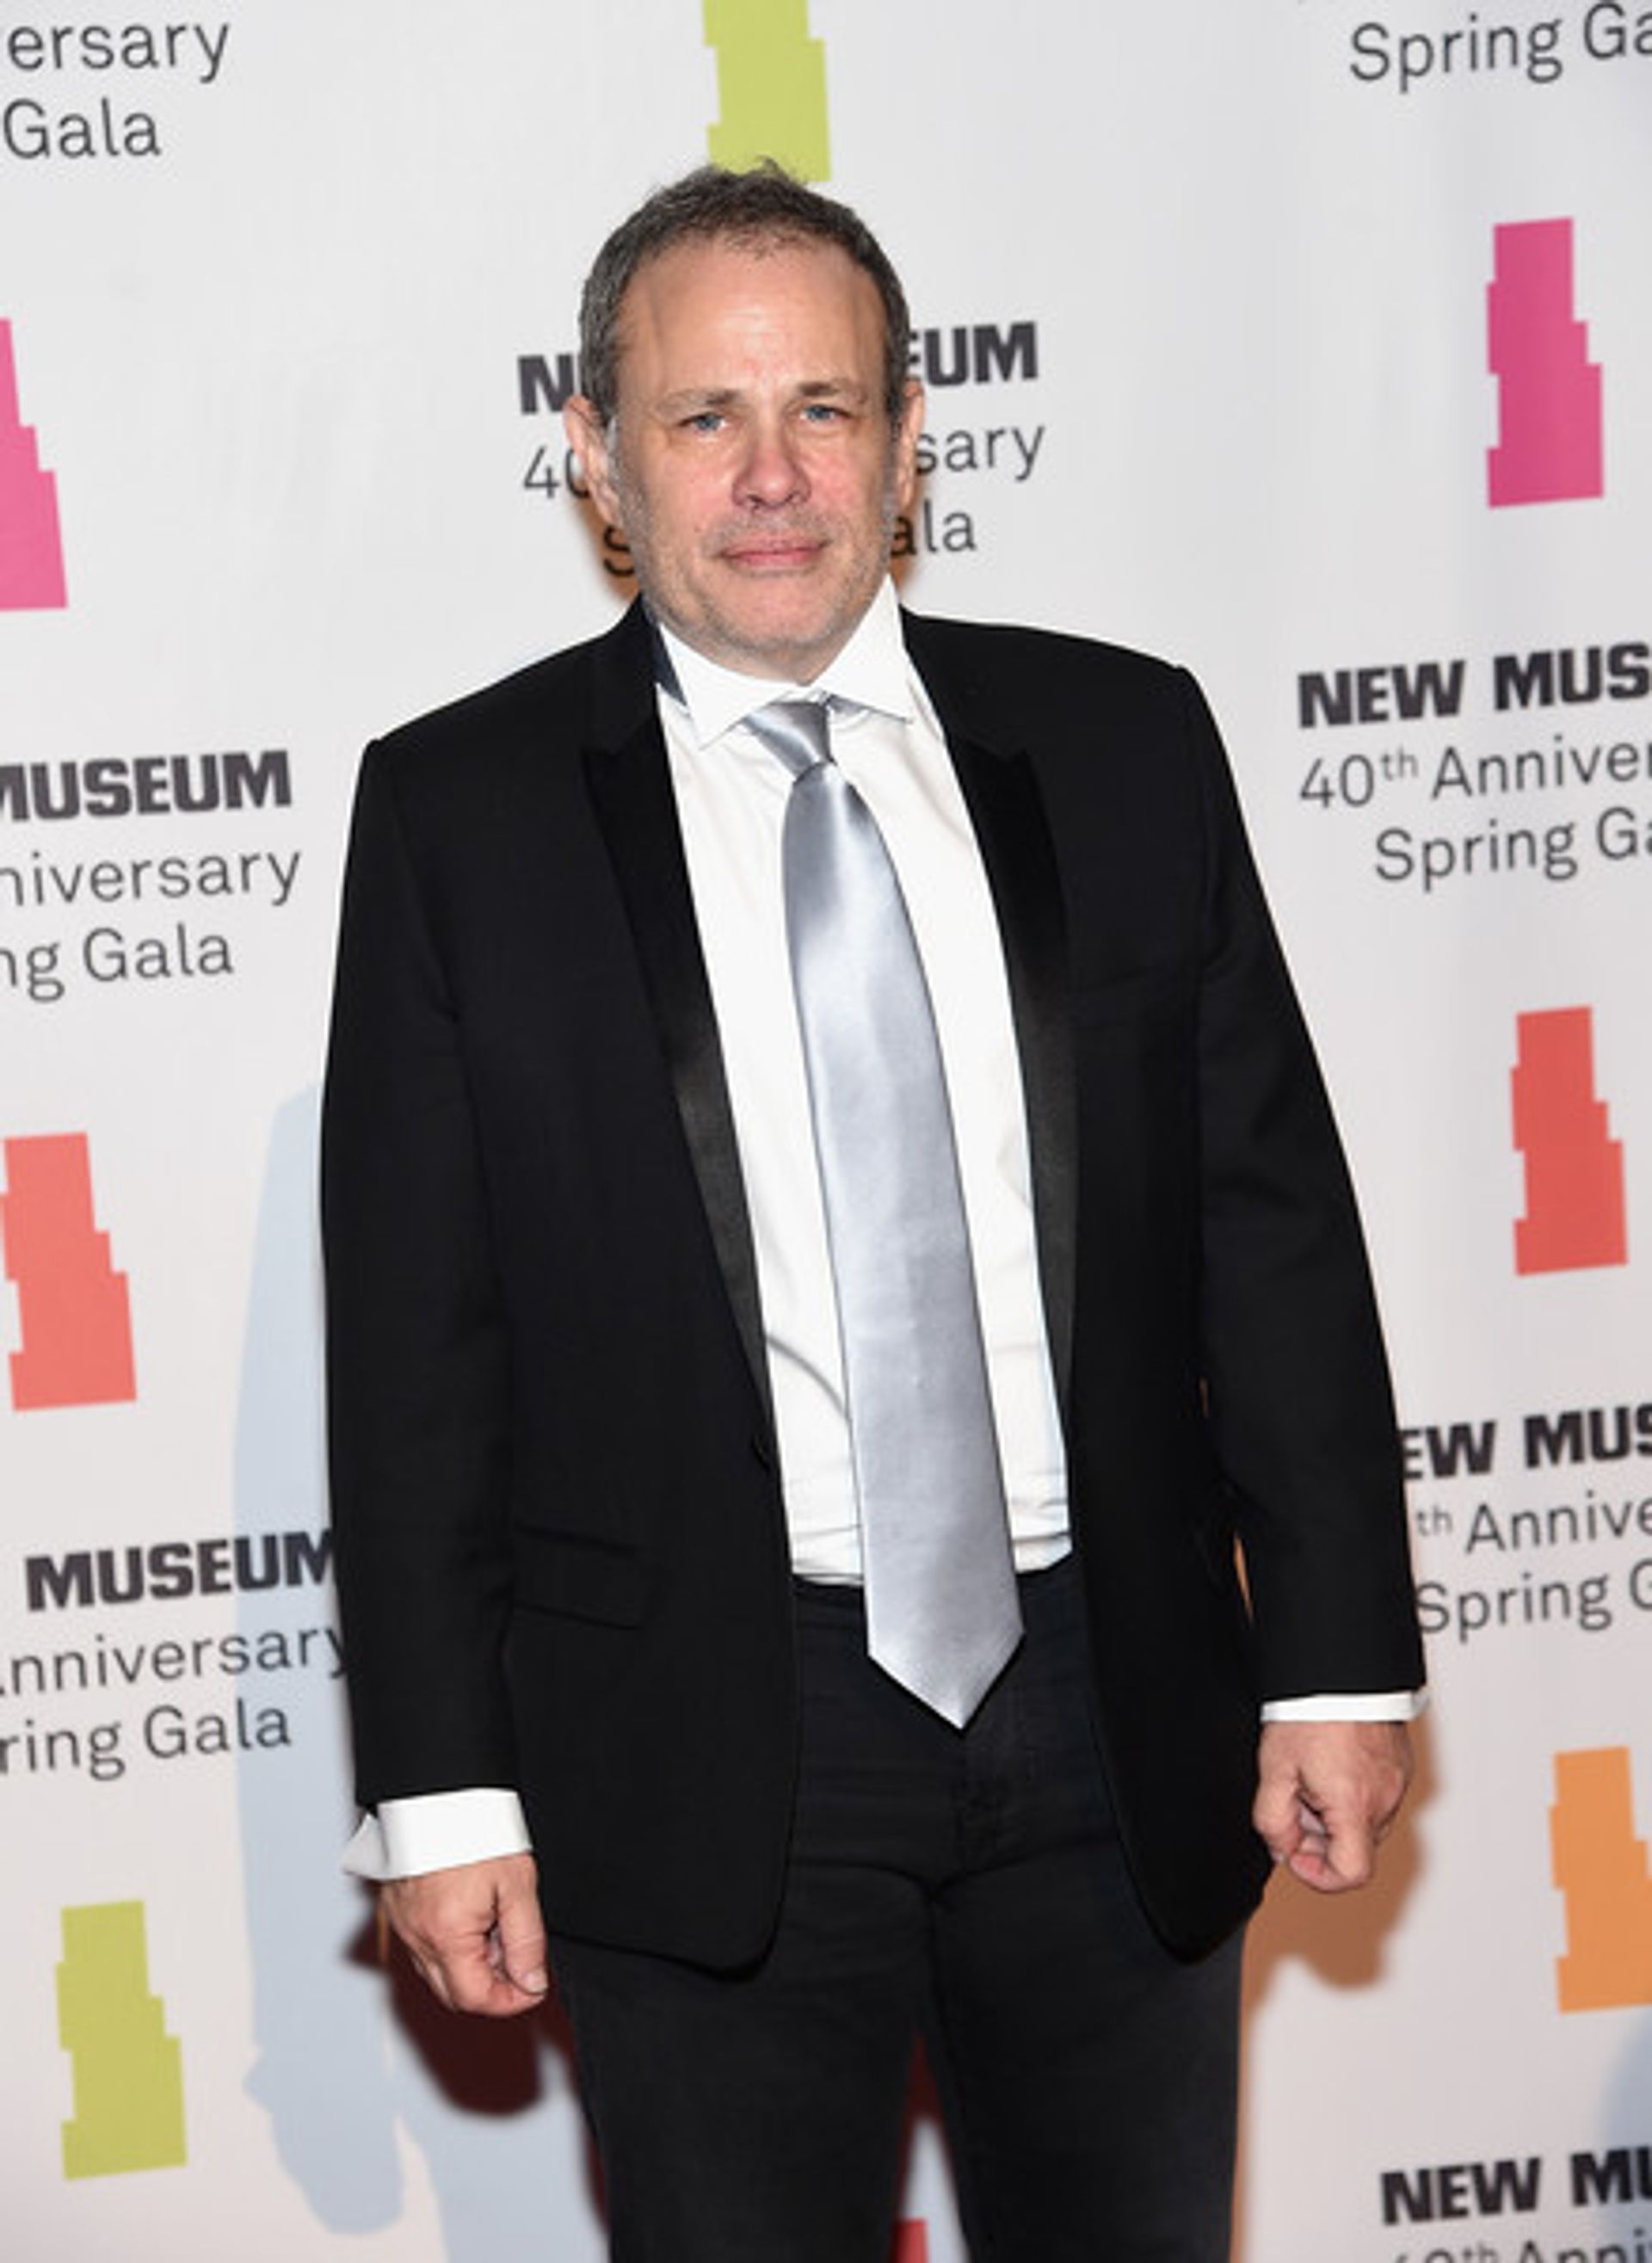 Allan Schwartzman at the New Museum gala in 2017. Jamie McCarthy/Getty Images